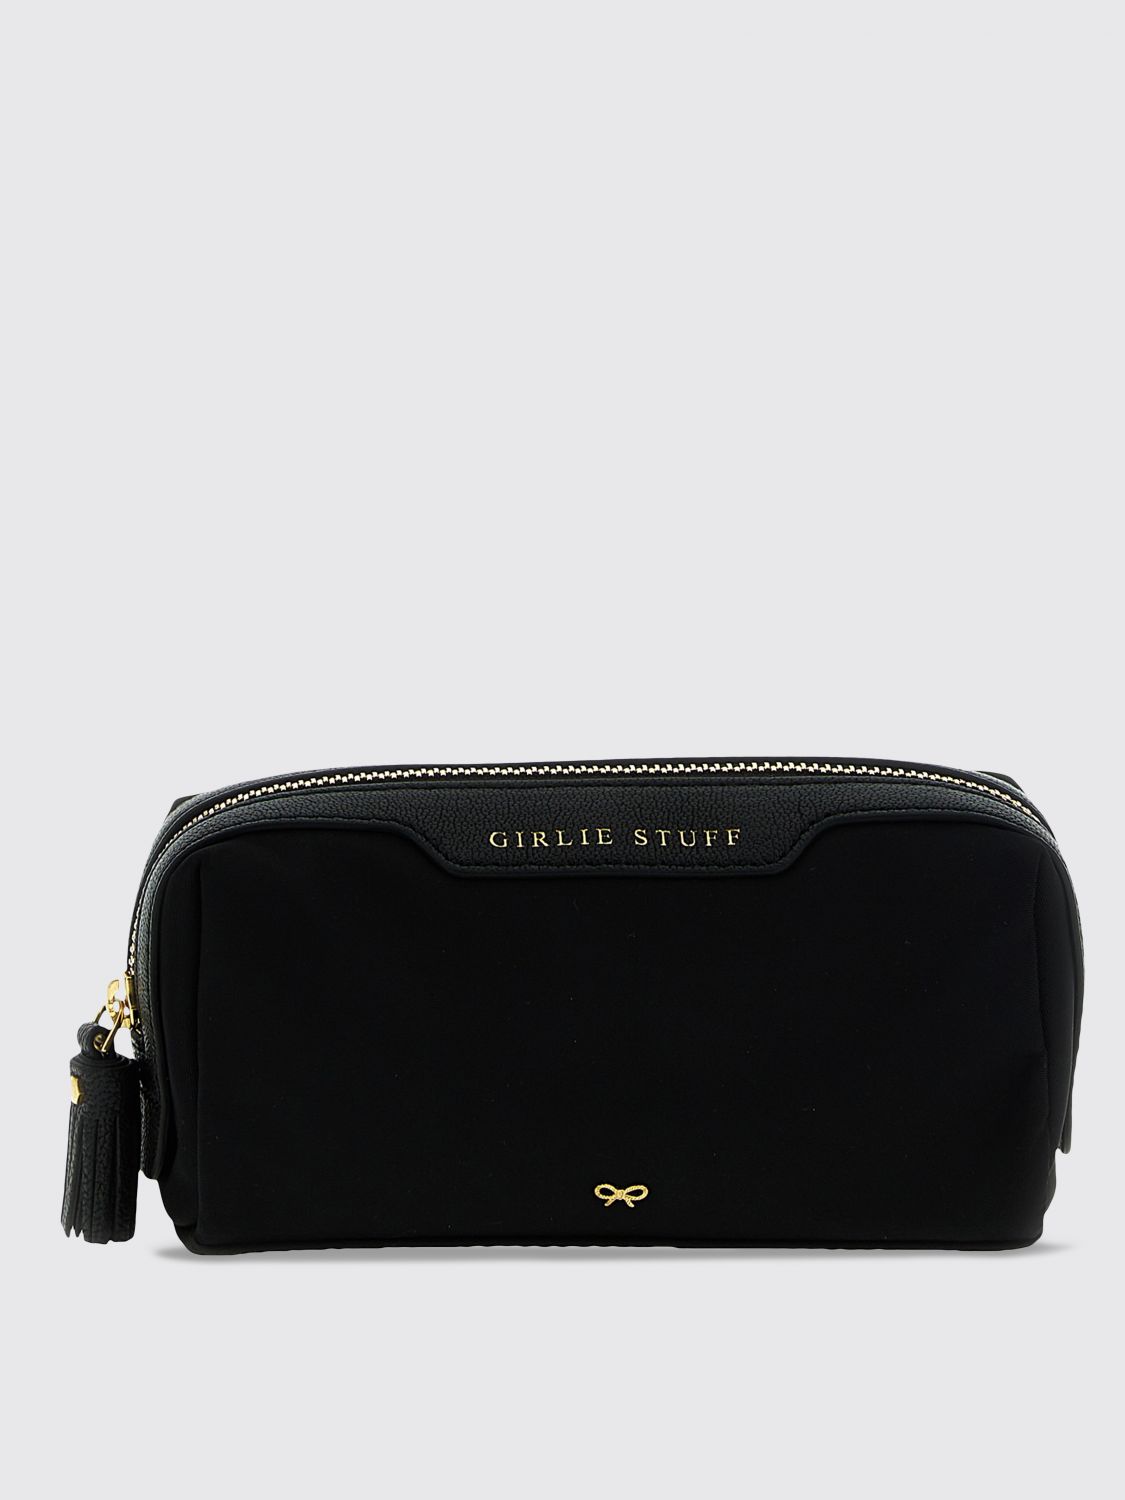 Anya Hindmarch Beauty Accessories ANYA HINDMARCH Lifestyle colour Black